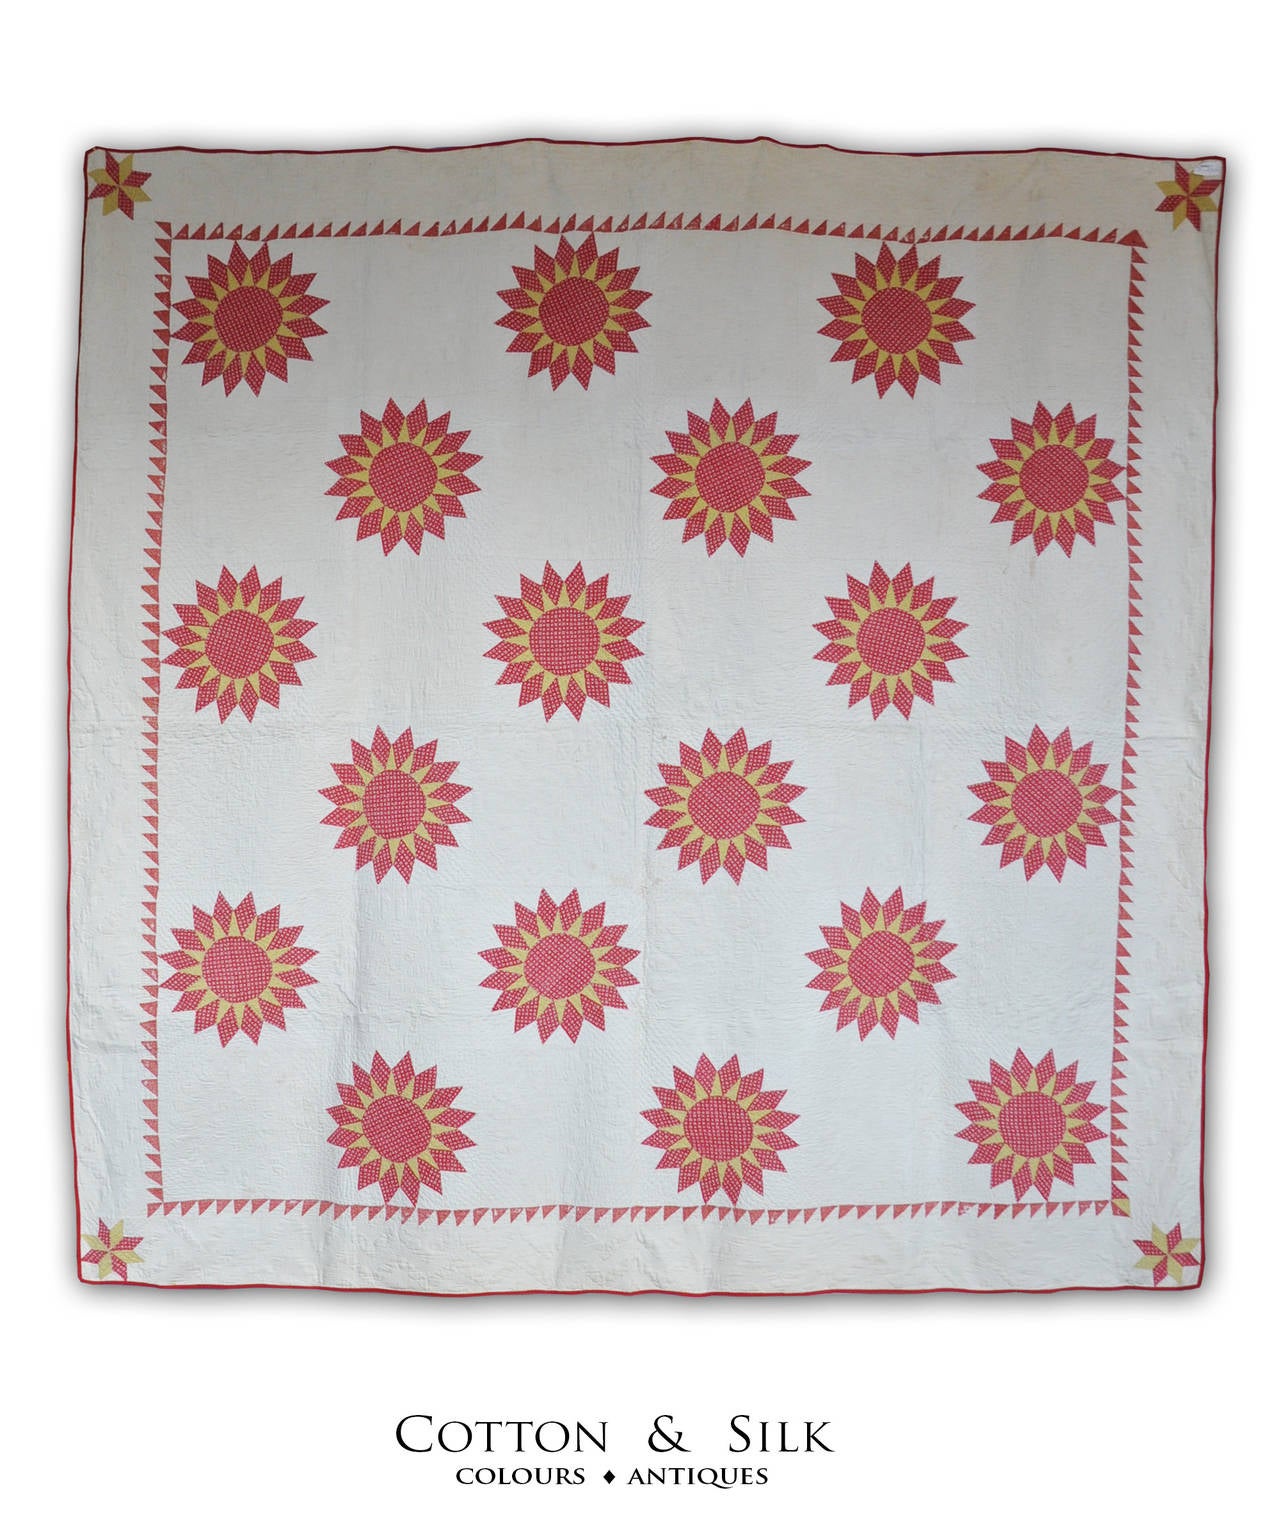 Sunburst Stars in red and yellow on the white background .
The Saw -Tooth is a elegant border for this magnificent quilt.